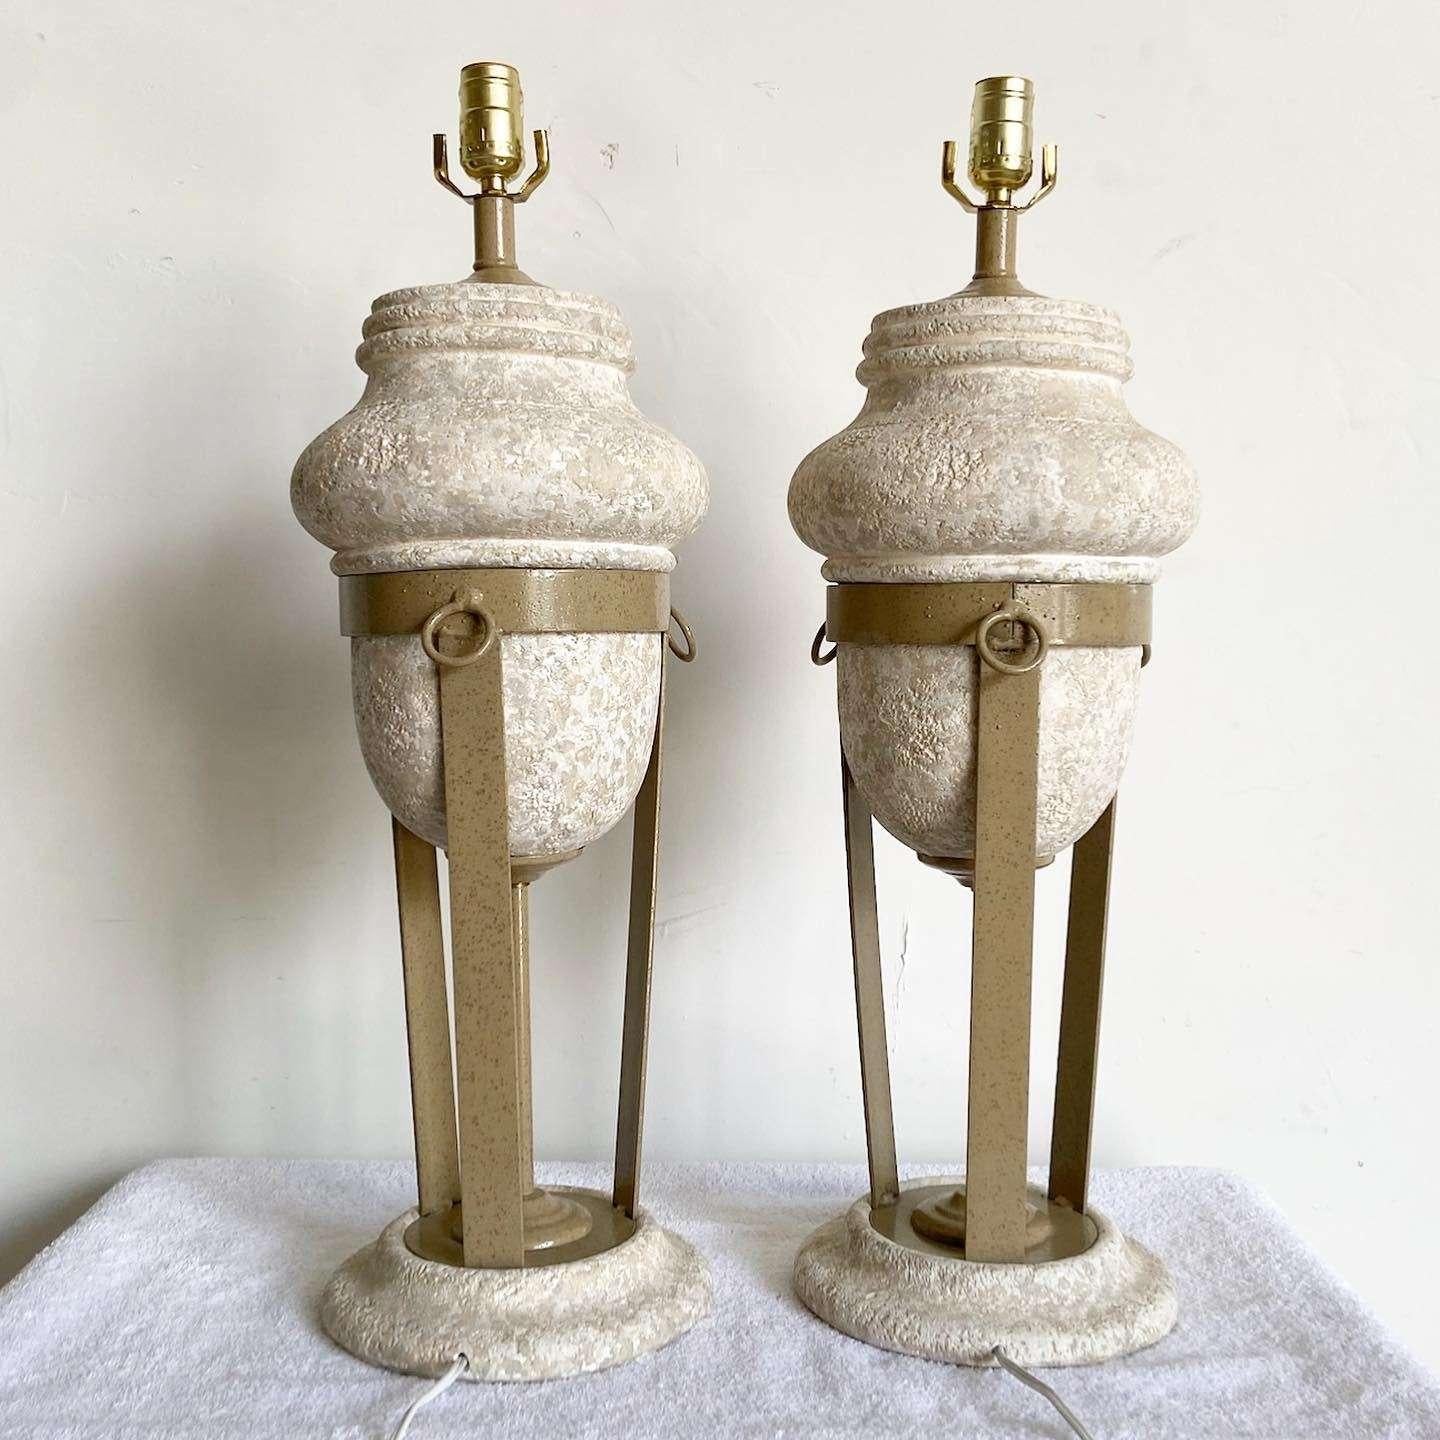 Exceptional pair of postmodern ceramic and metal table lamps. Each feature an almost Roman aesthetic with a porous plaster resting in a metal frame. 